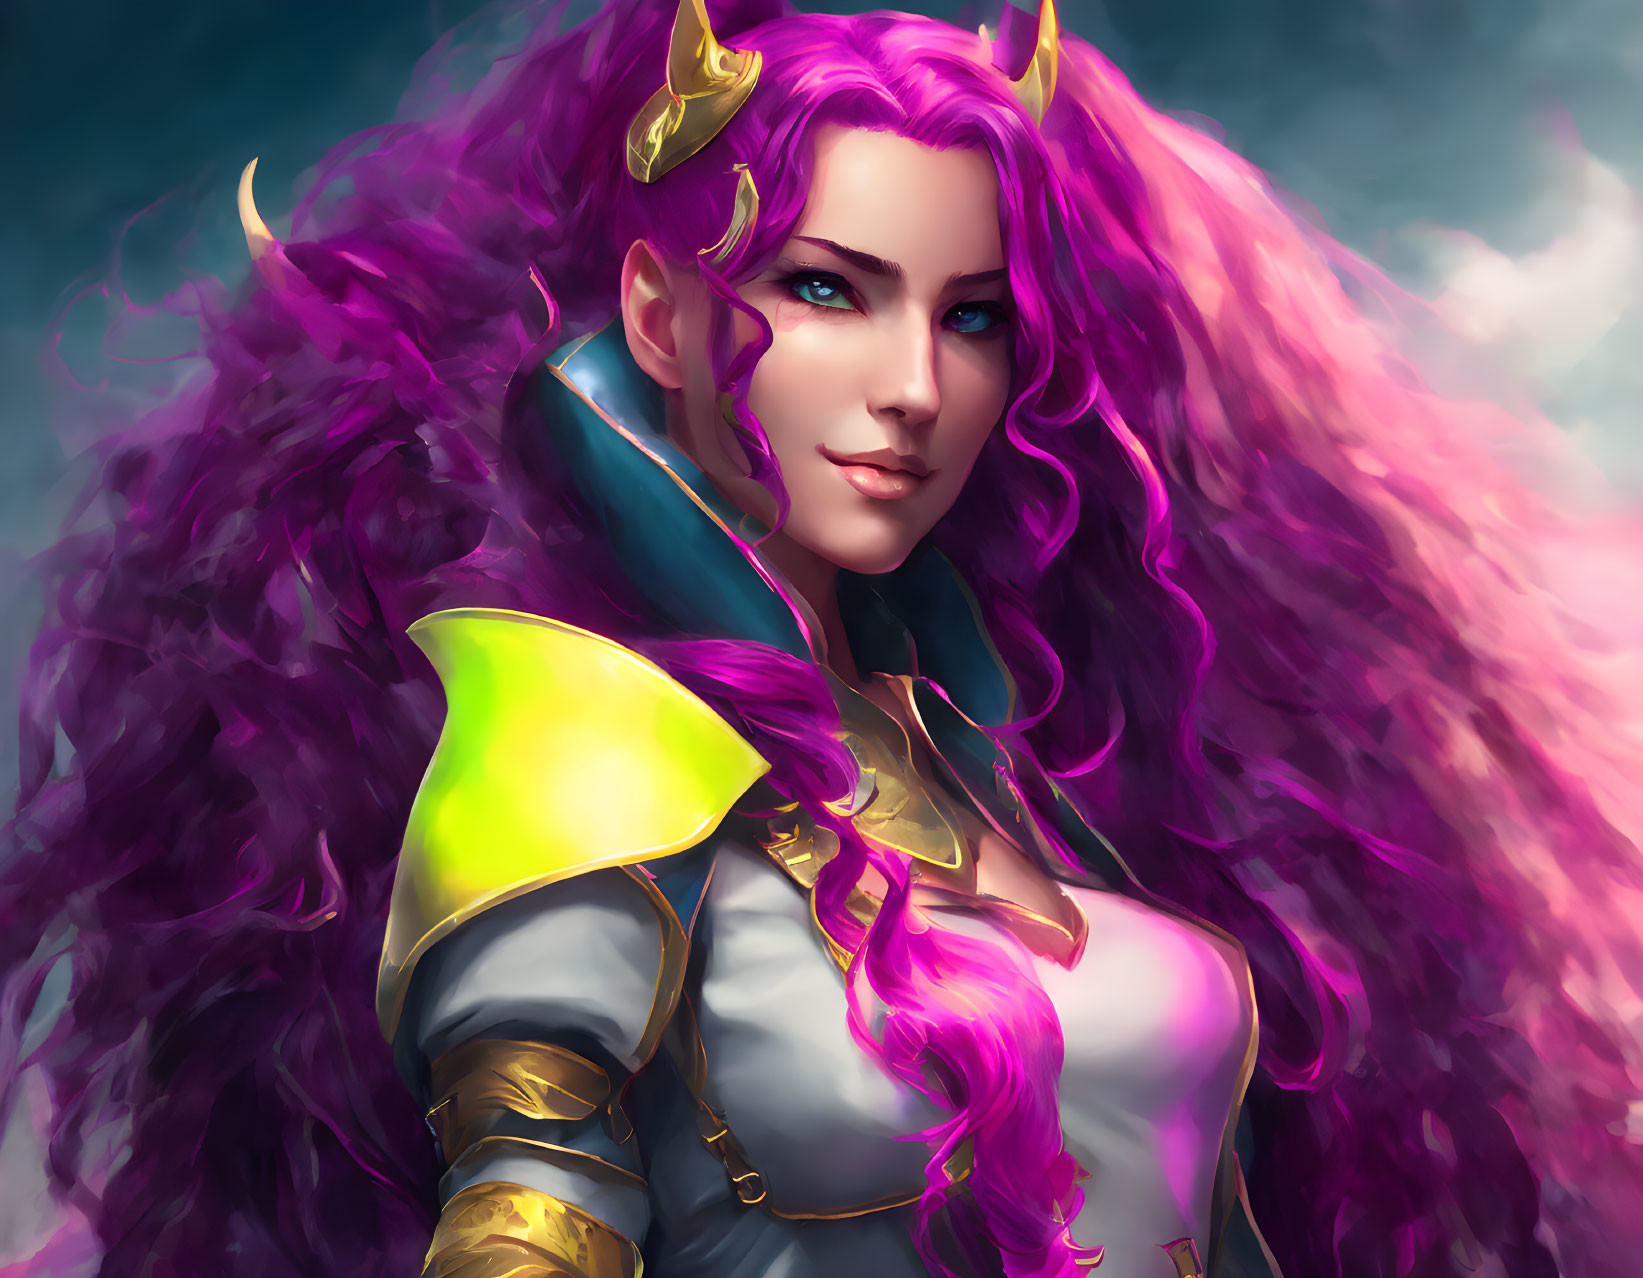 Fantasy character with purple hair, horns, gentle smile, gold-accented armor